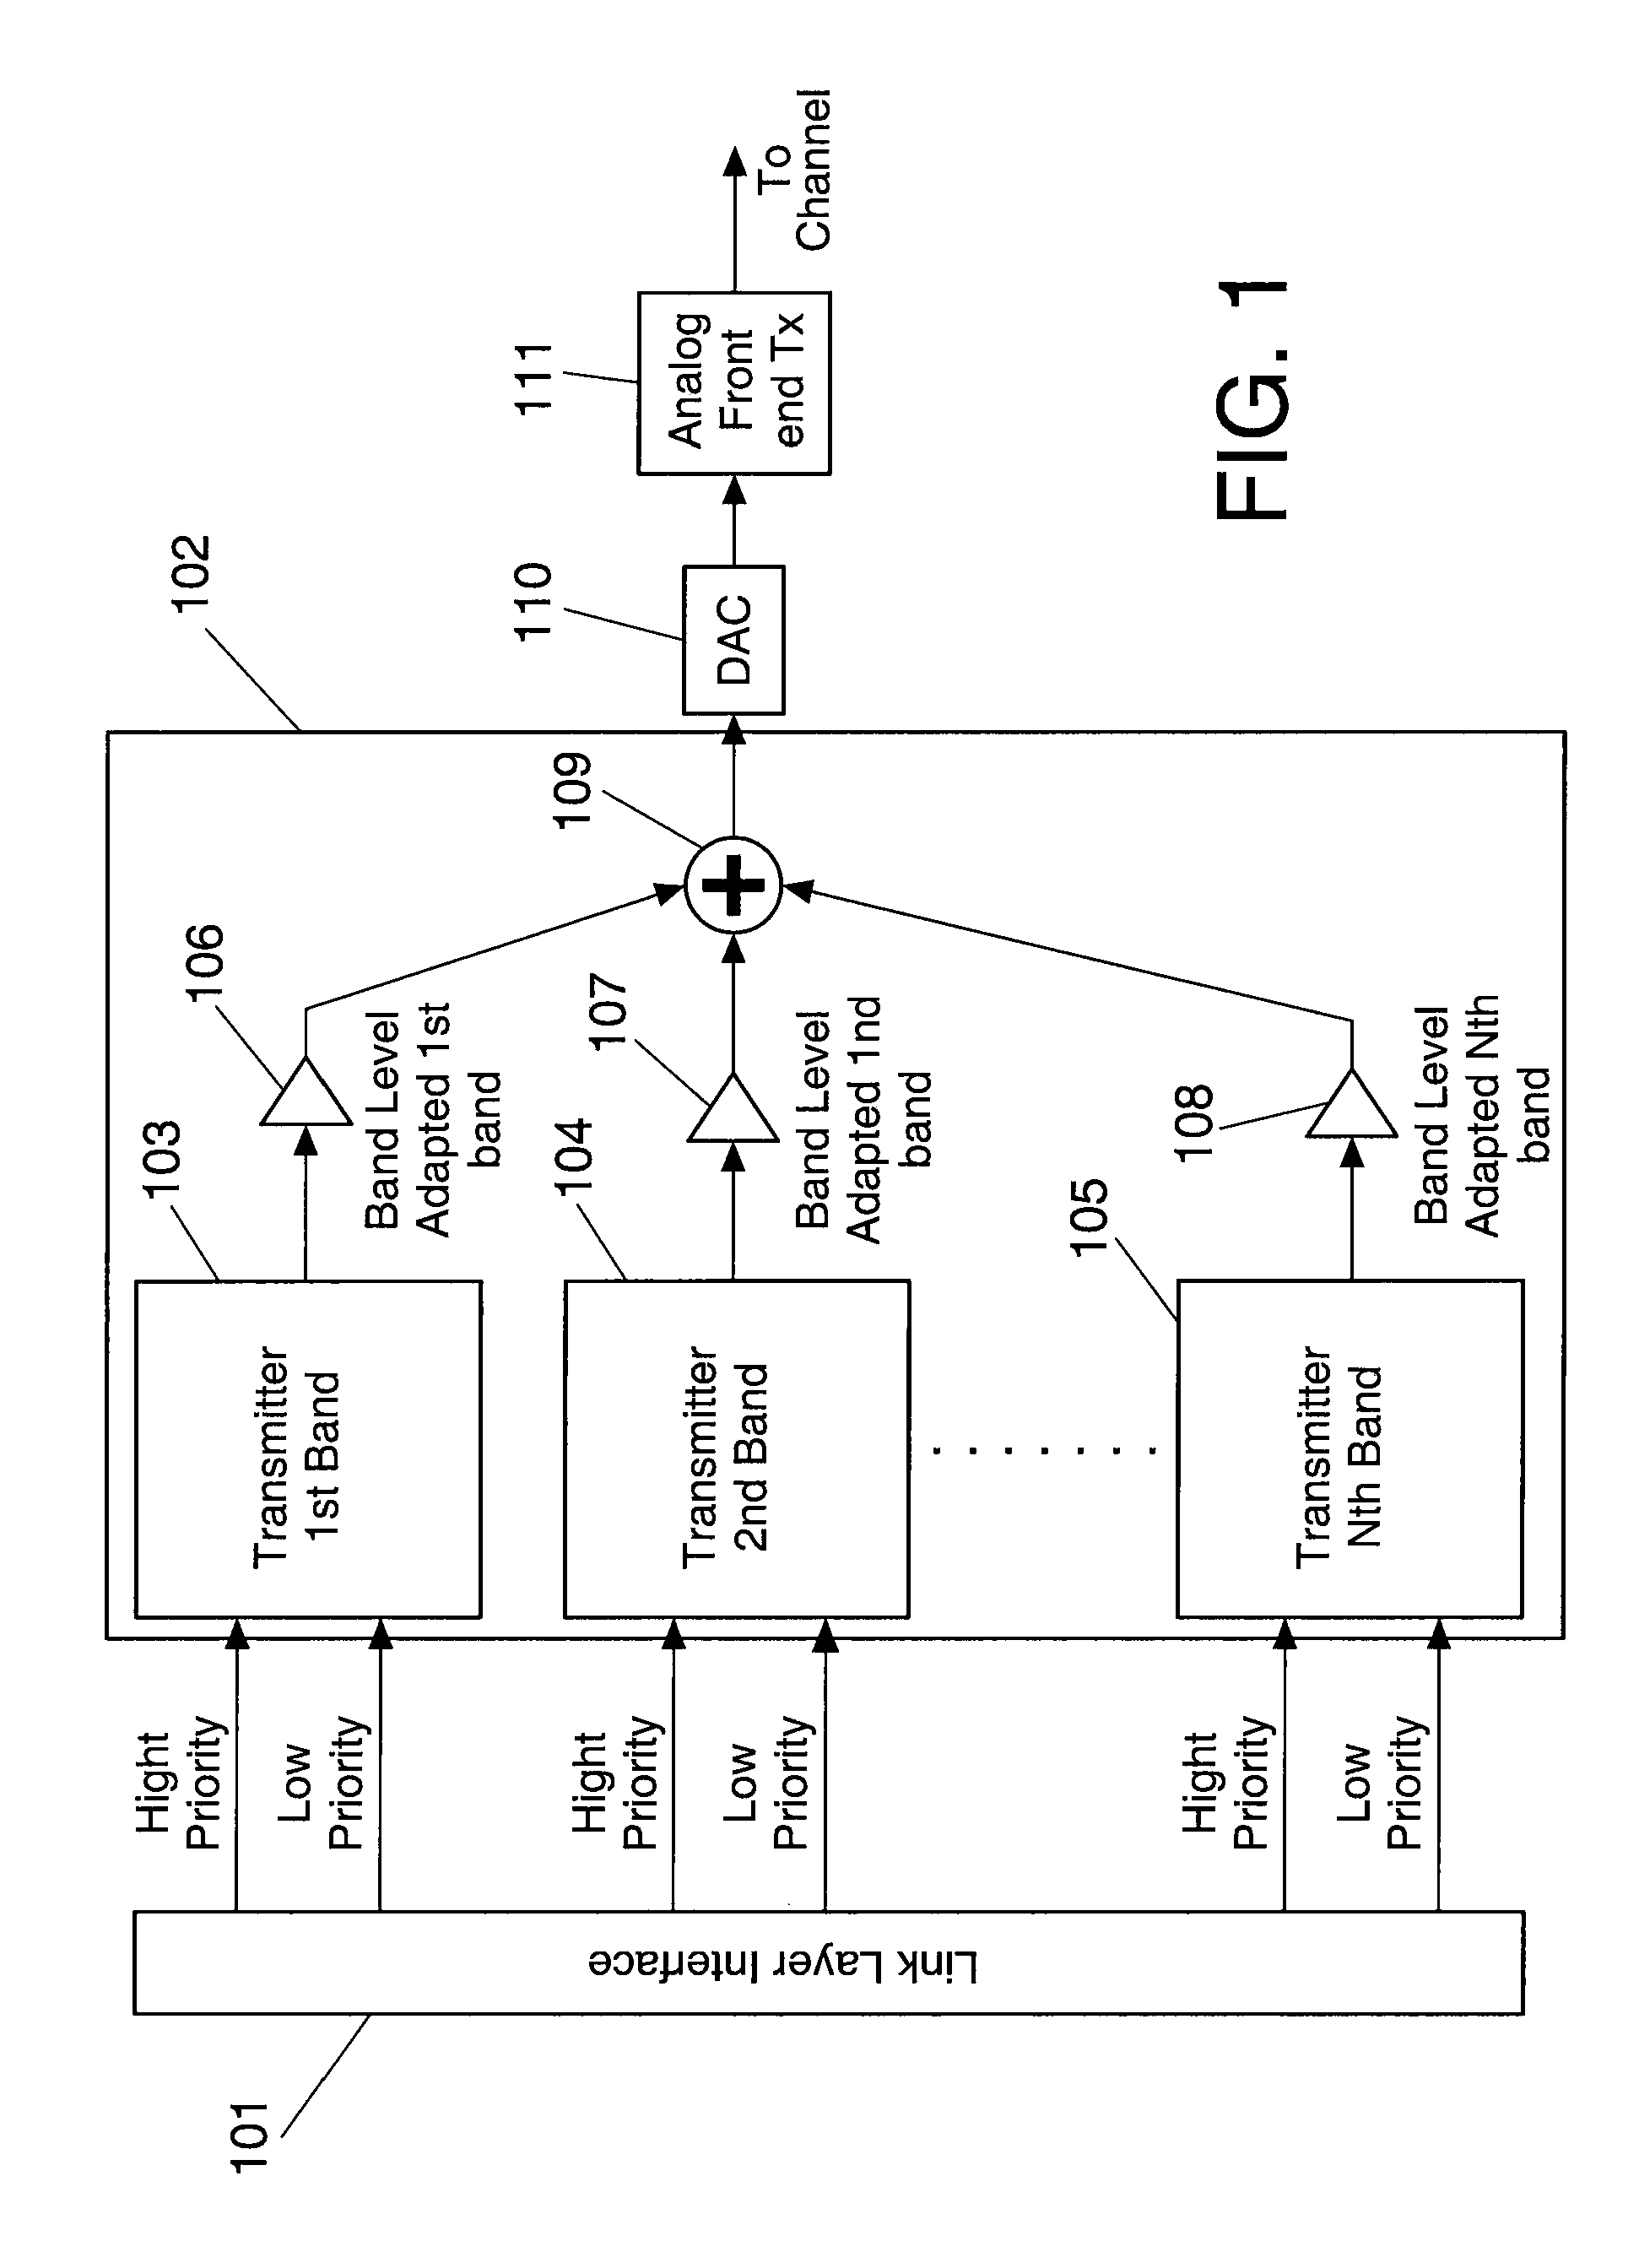 System and transceiver for DSL communications based on single carrier modulation, with efficient vectoring, capacity approaching channel coding structure and preamble insertion for agile channel adaptation